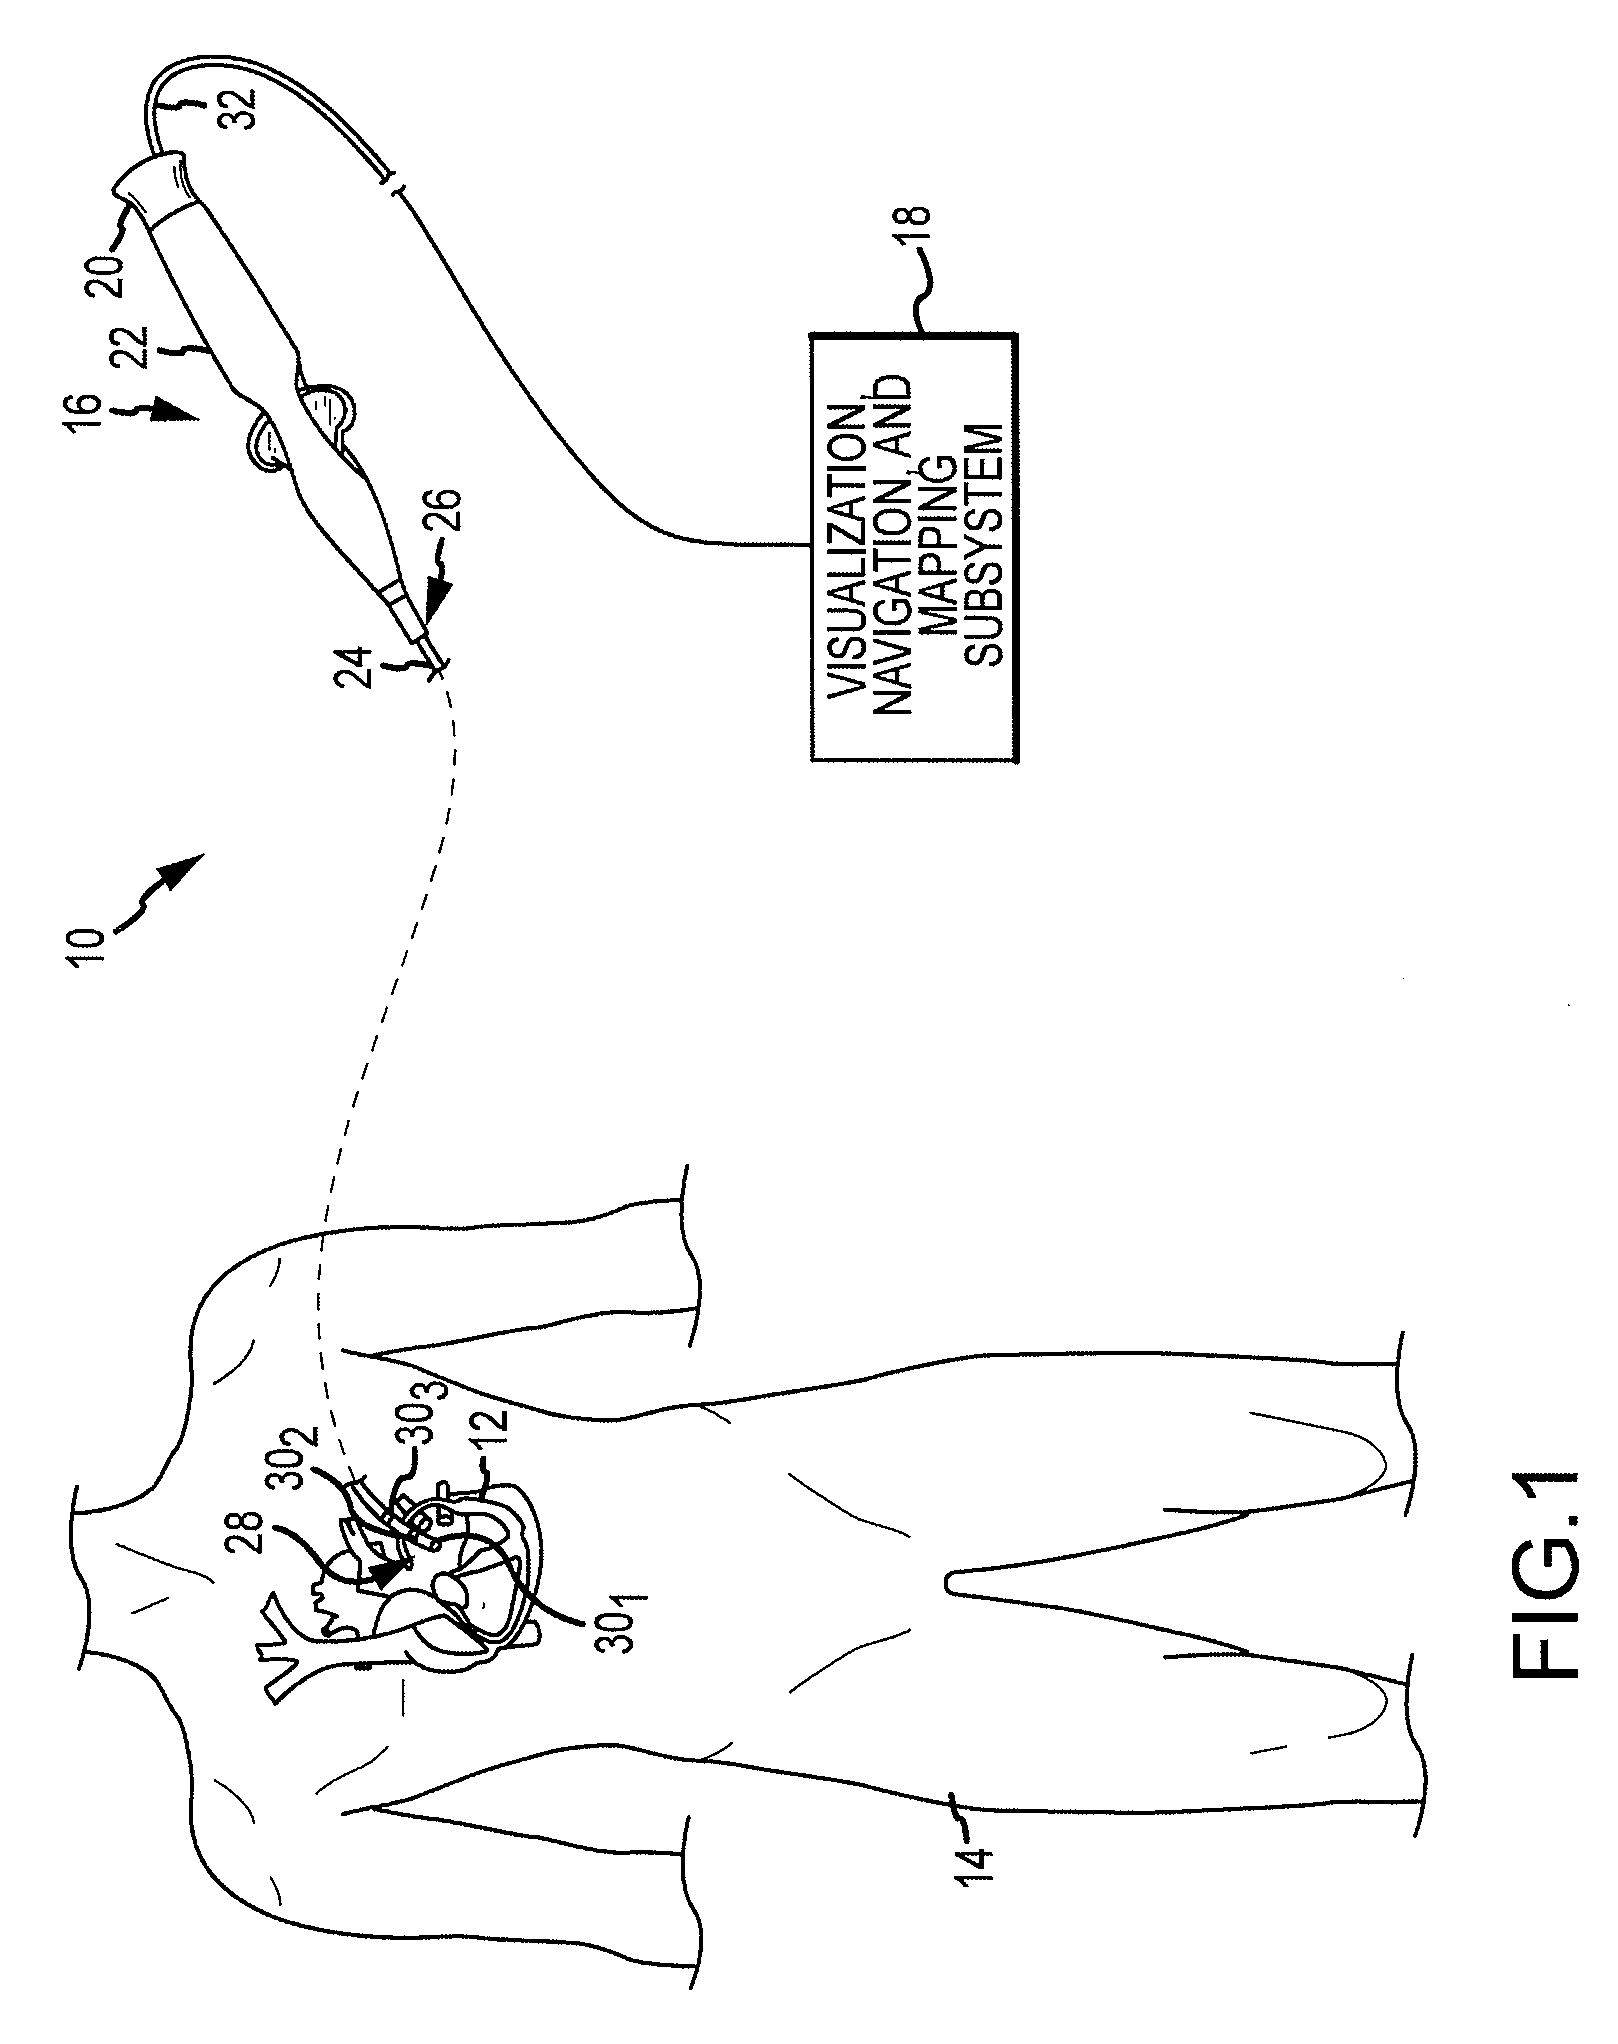 System and method for diagnosing arrhythmias and directing catheter therapies